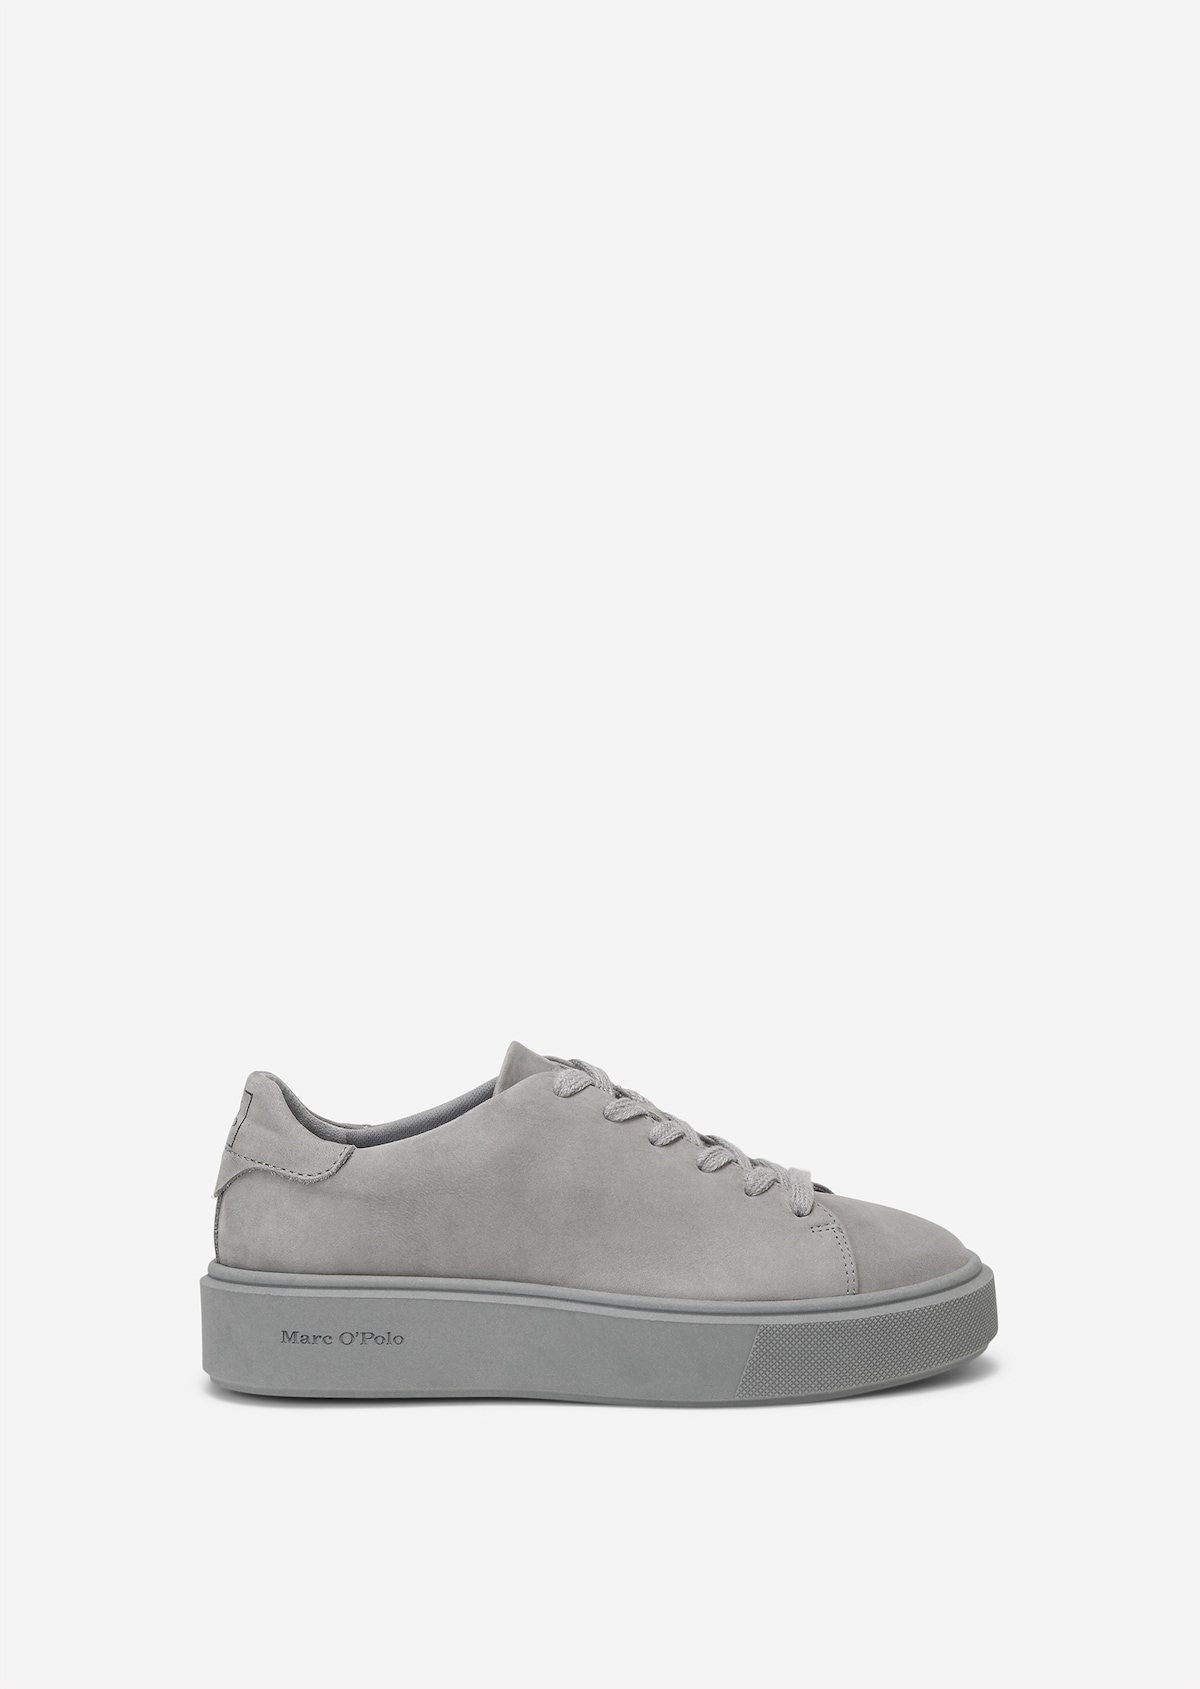 Trainers with a cup sole - gray | Sneakers | MARC O’POLO